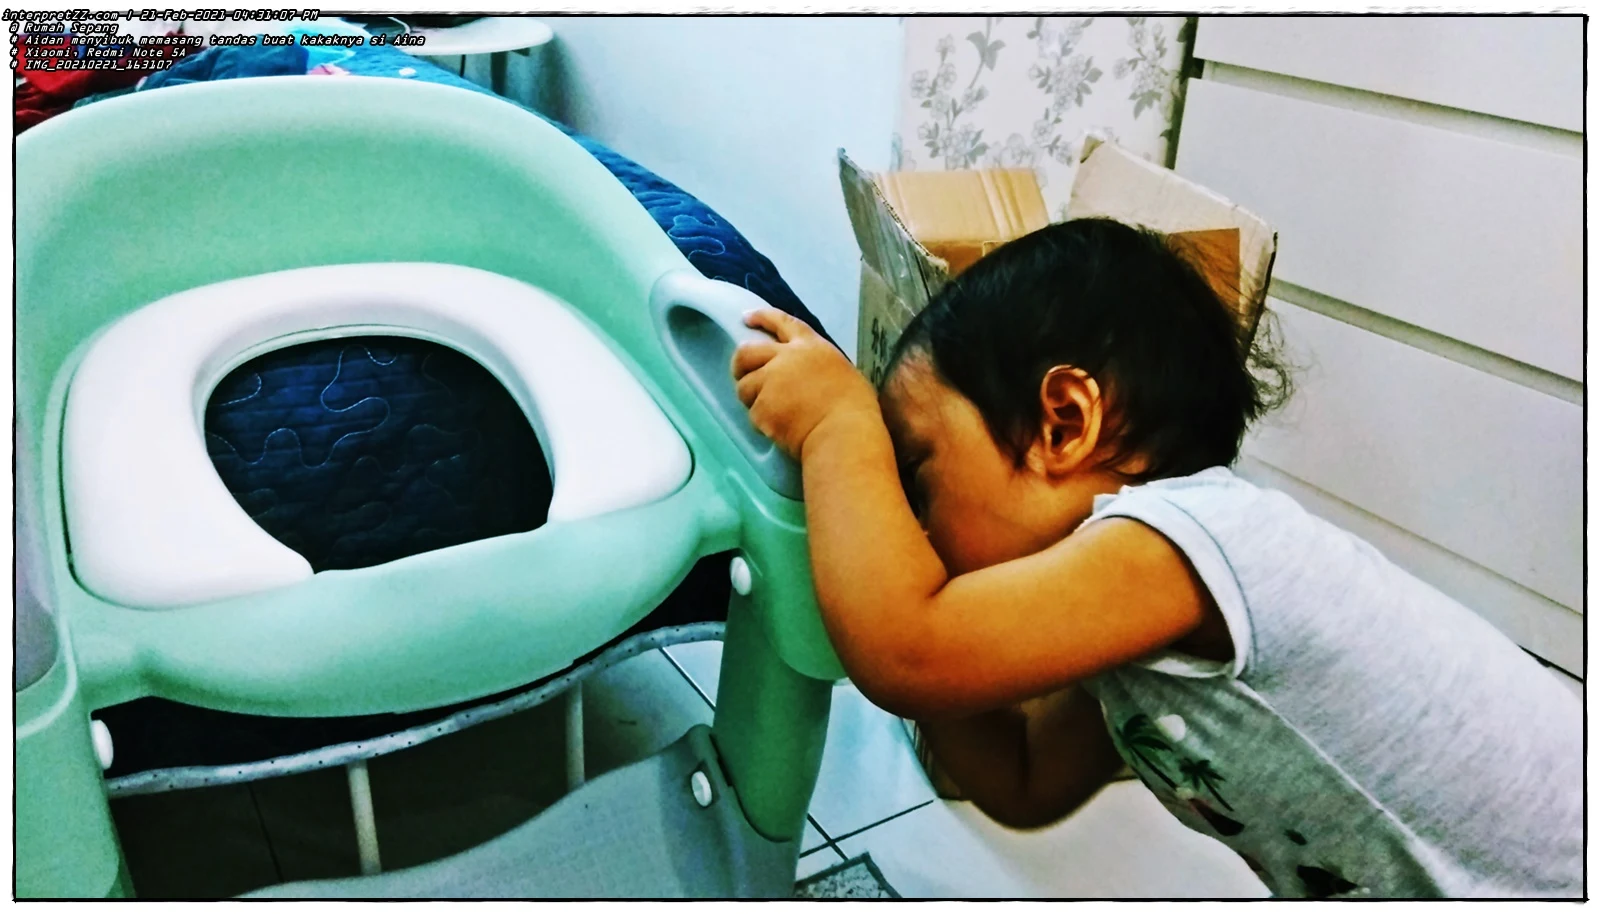 Aidan's action picture is busy also trying to install a toilet for his sister Aina. Hopefully with a special toilet for Aina this will make it easier for her to learn to defecate in the toilet (potty train) and not wear diapers anymore.